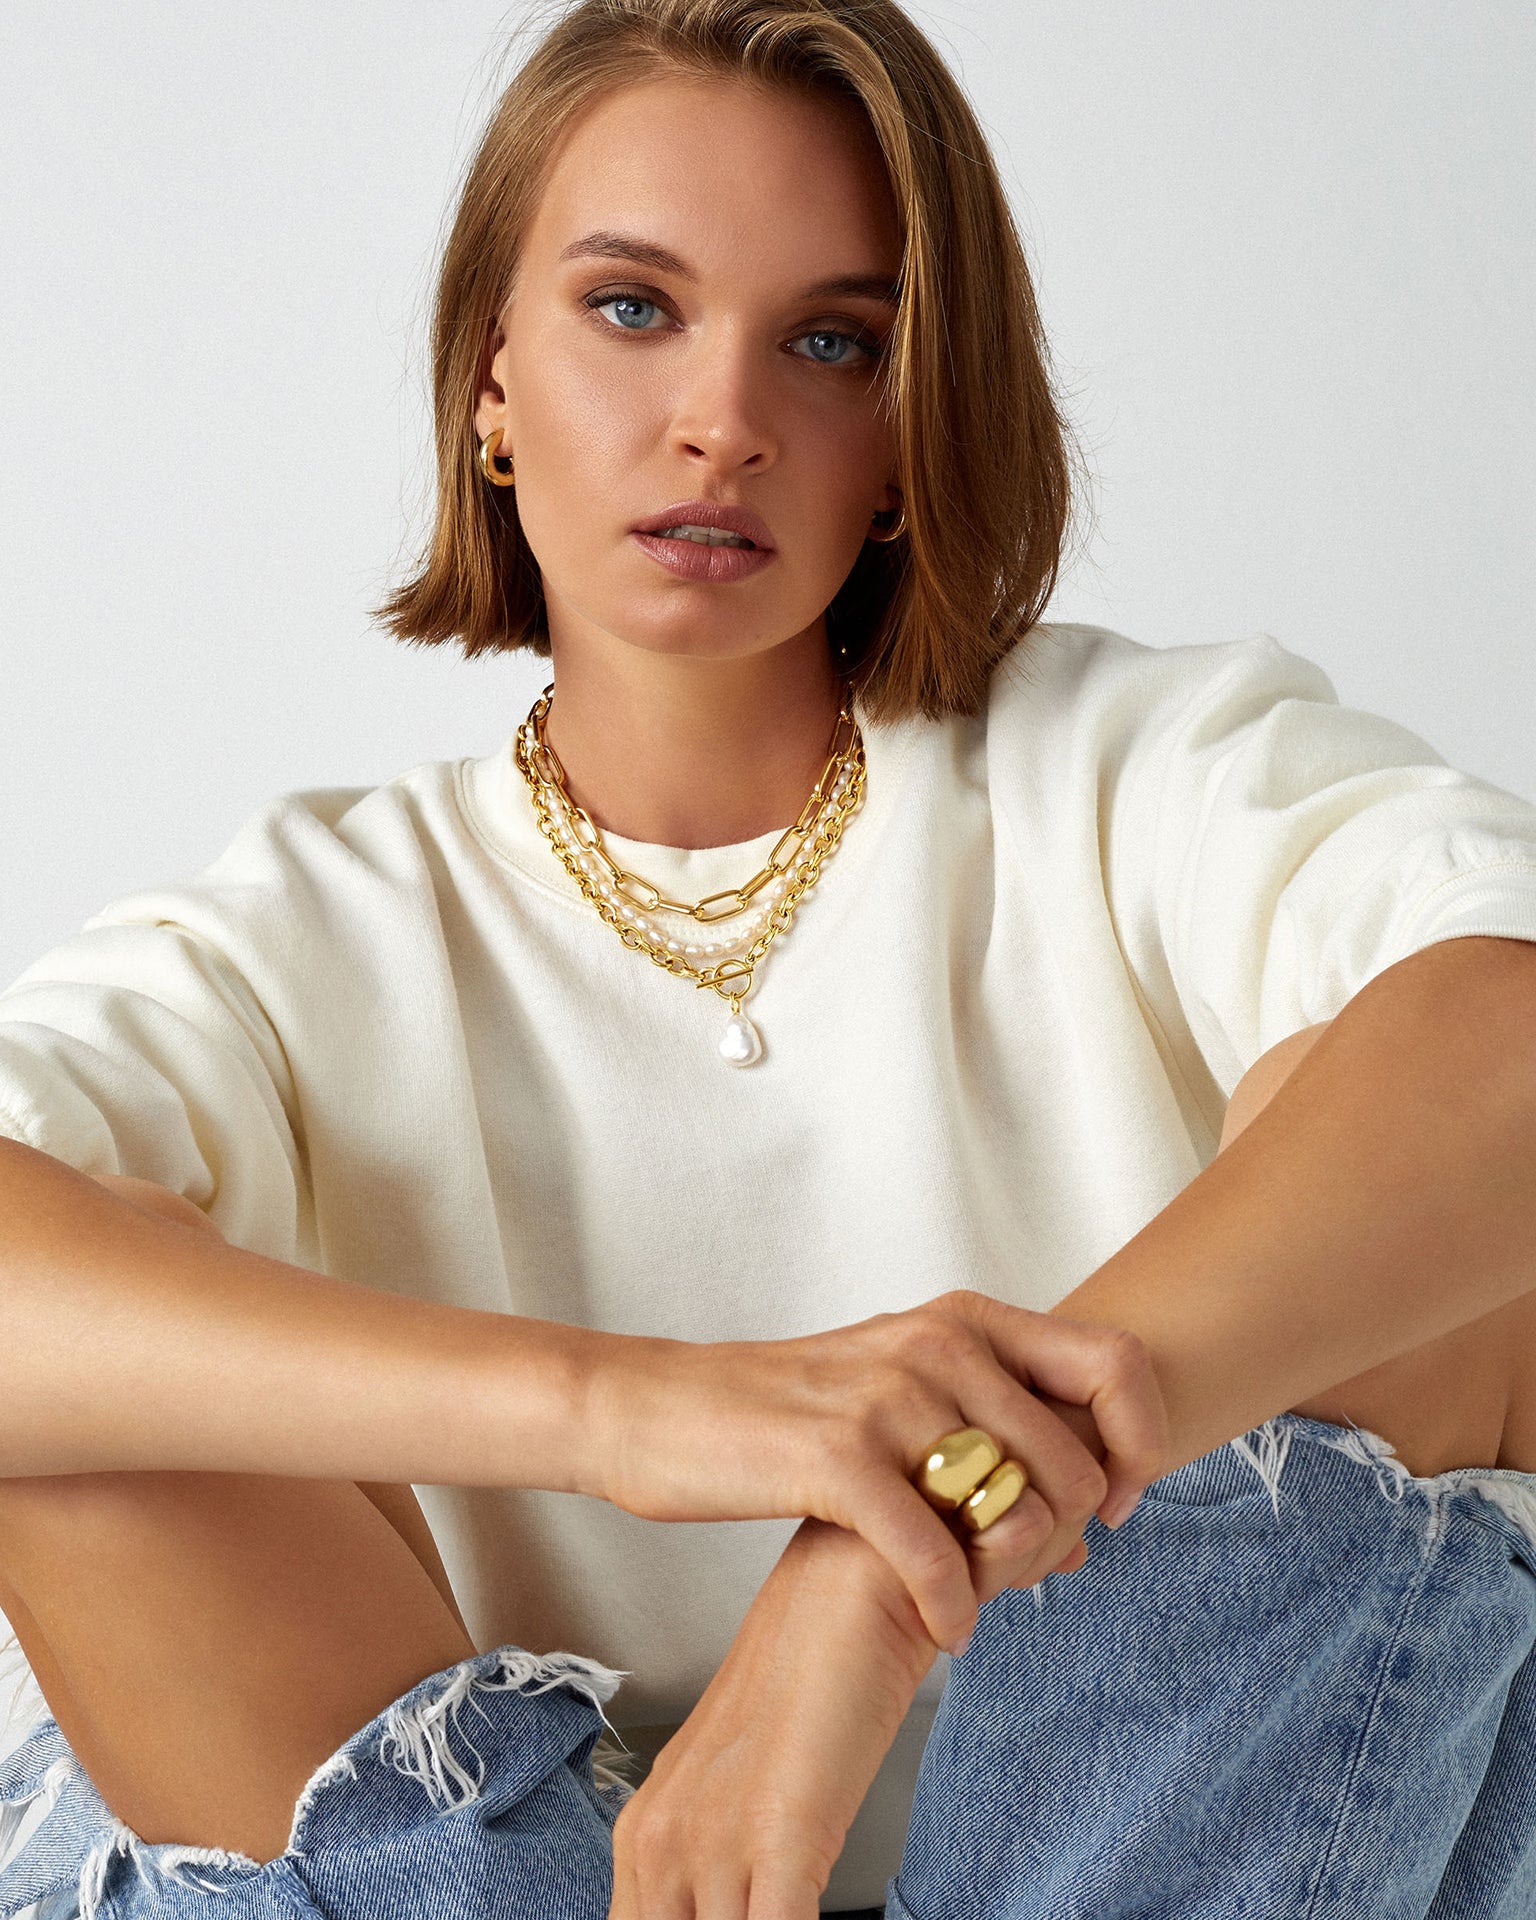 Le Fashion: A Chunky Chain Necklace Is Officially On My Must-Have List